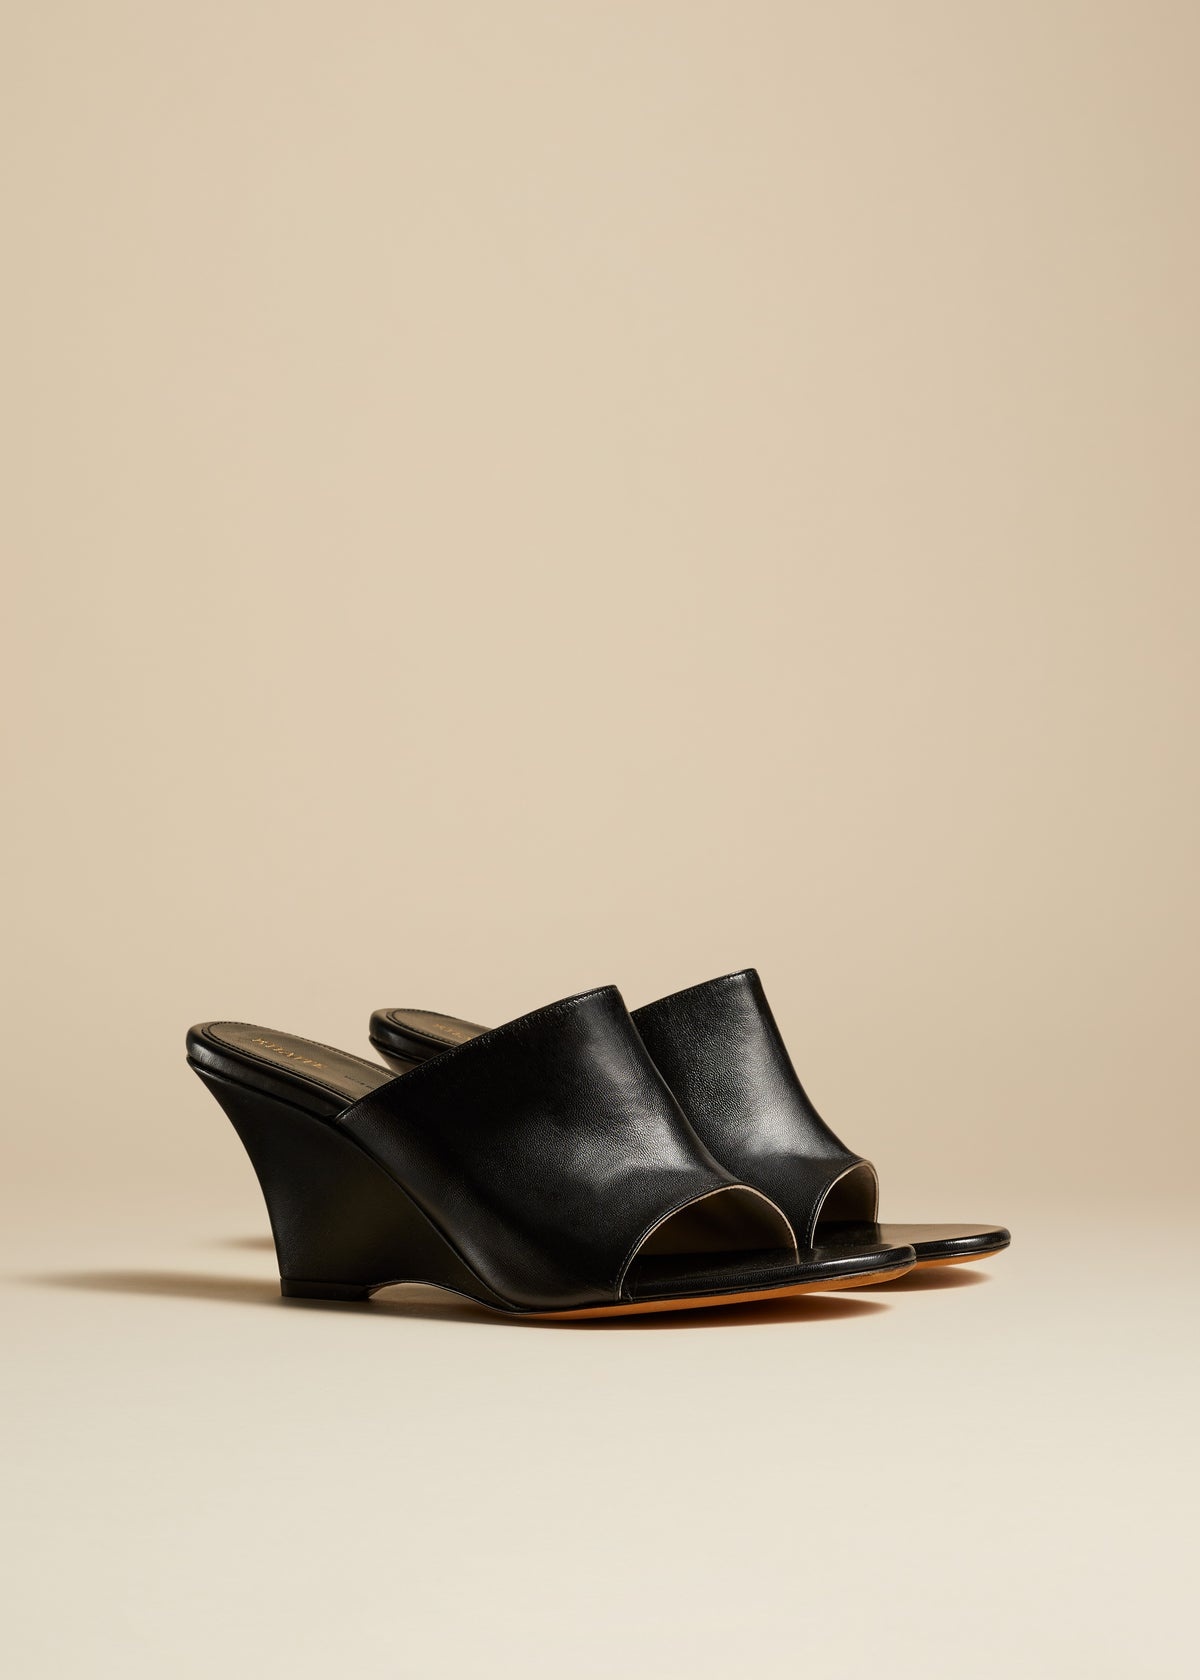 The Marion Wedge Sandal in Black Leather - 2